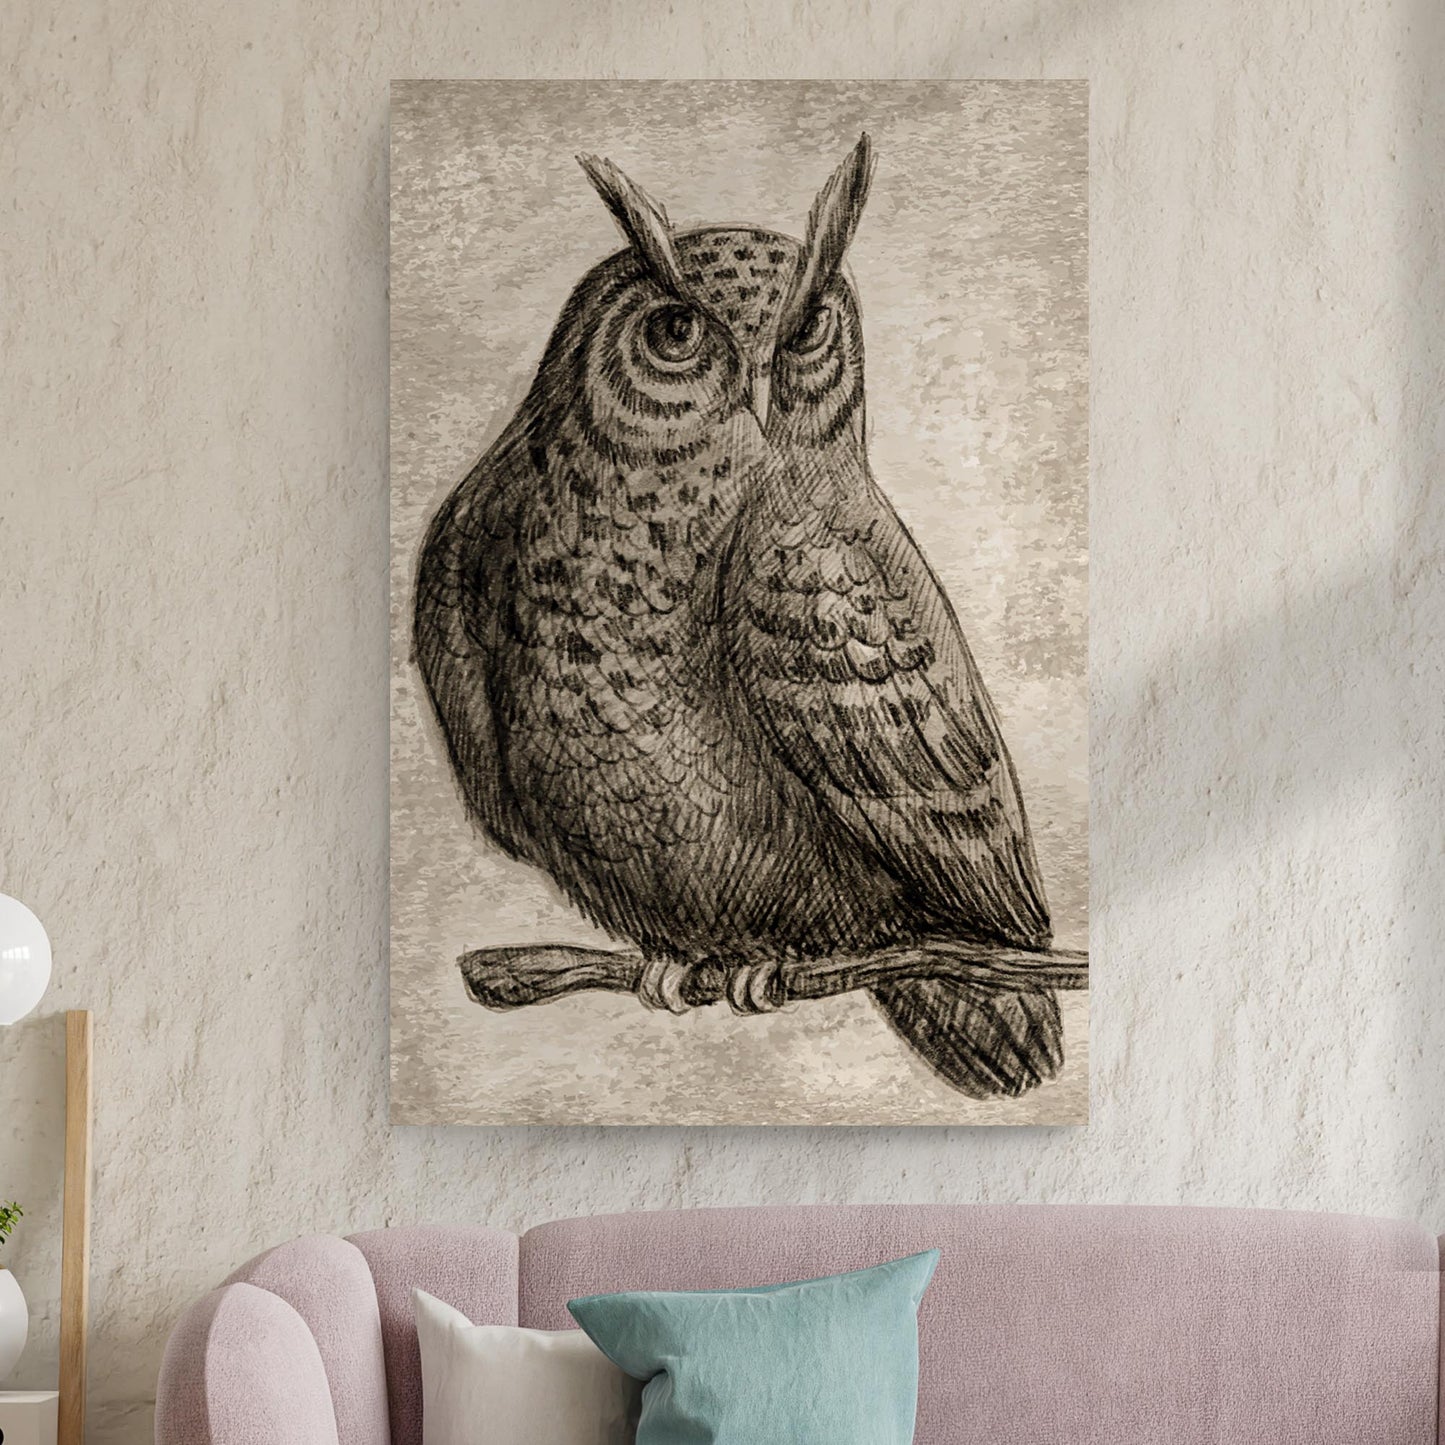 Owl Pencil Sketch Portrait Canvas Wall Art - Image by Tailored Canvases